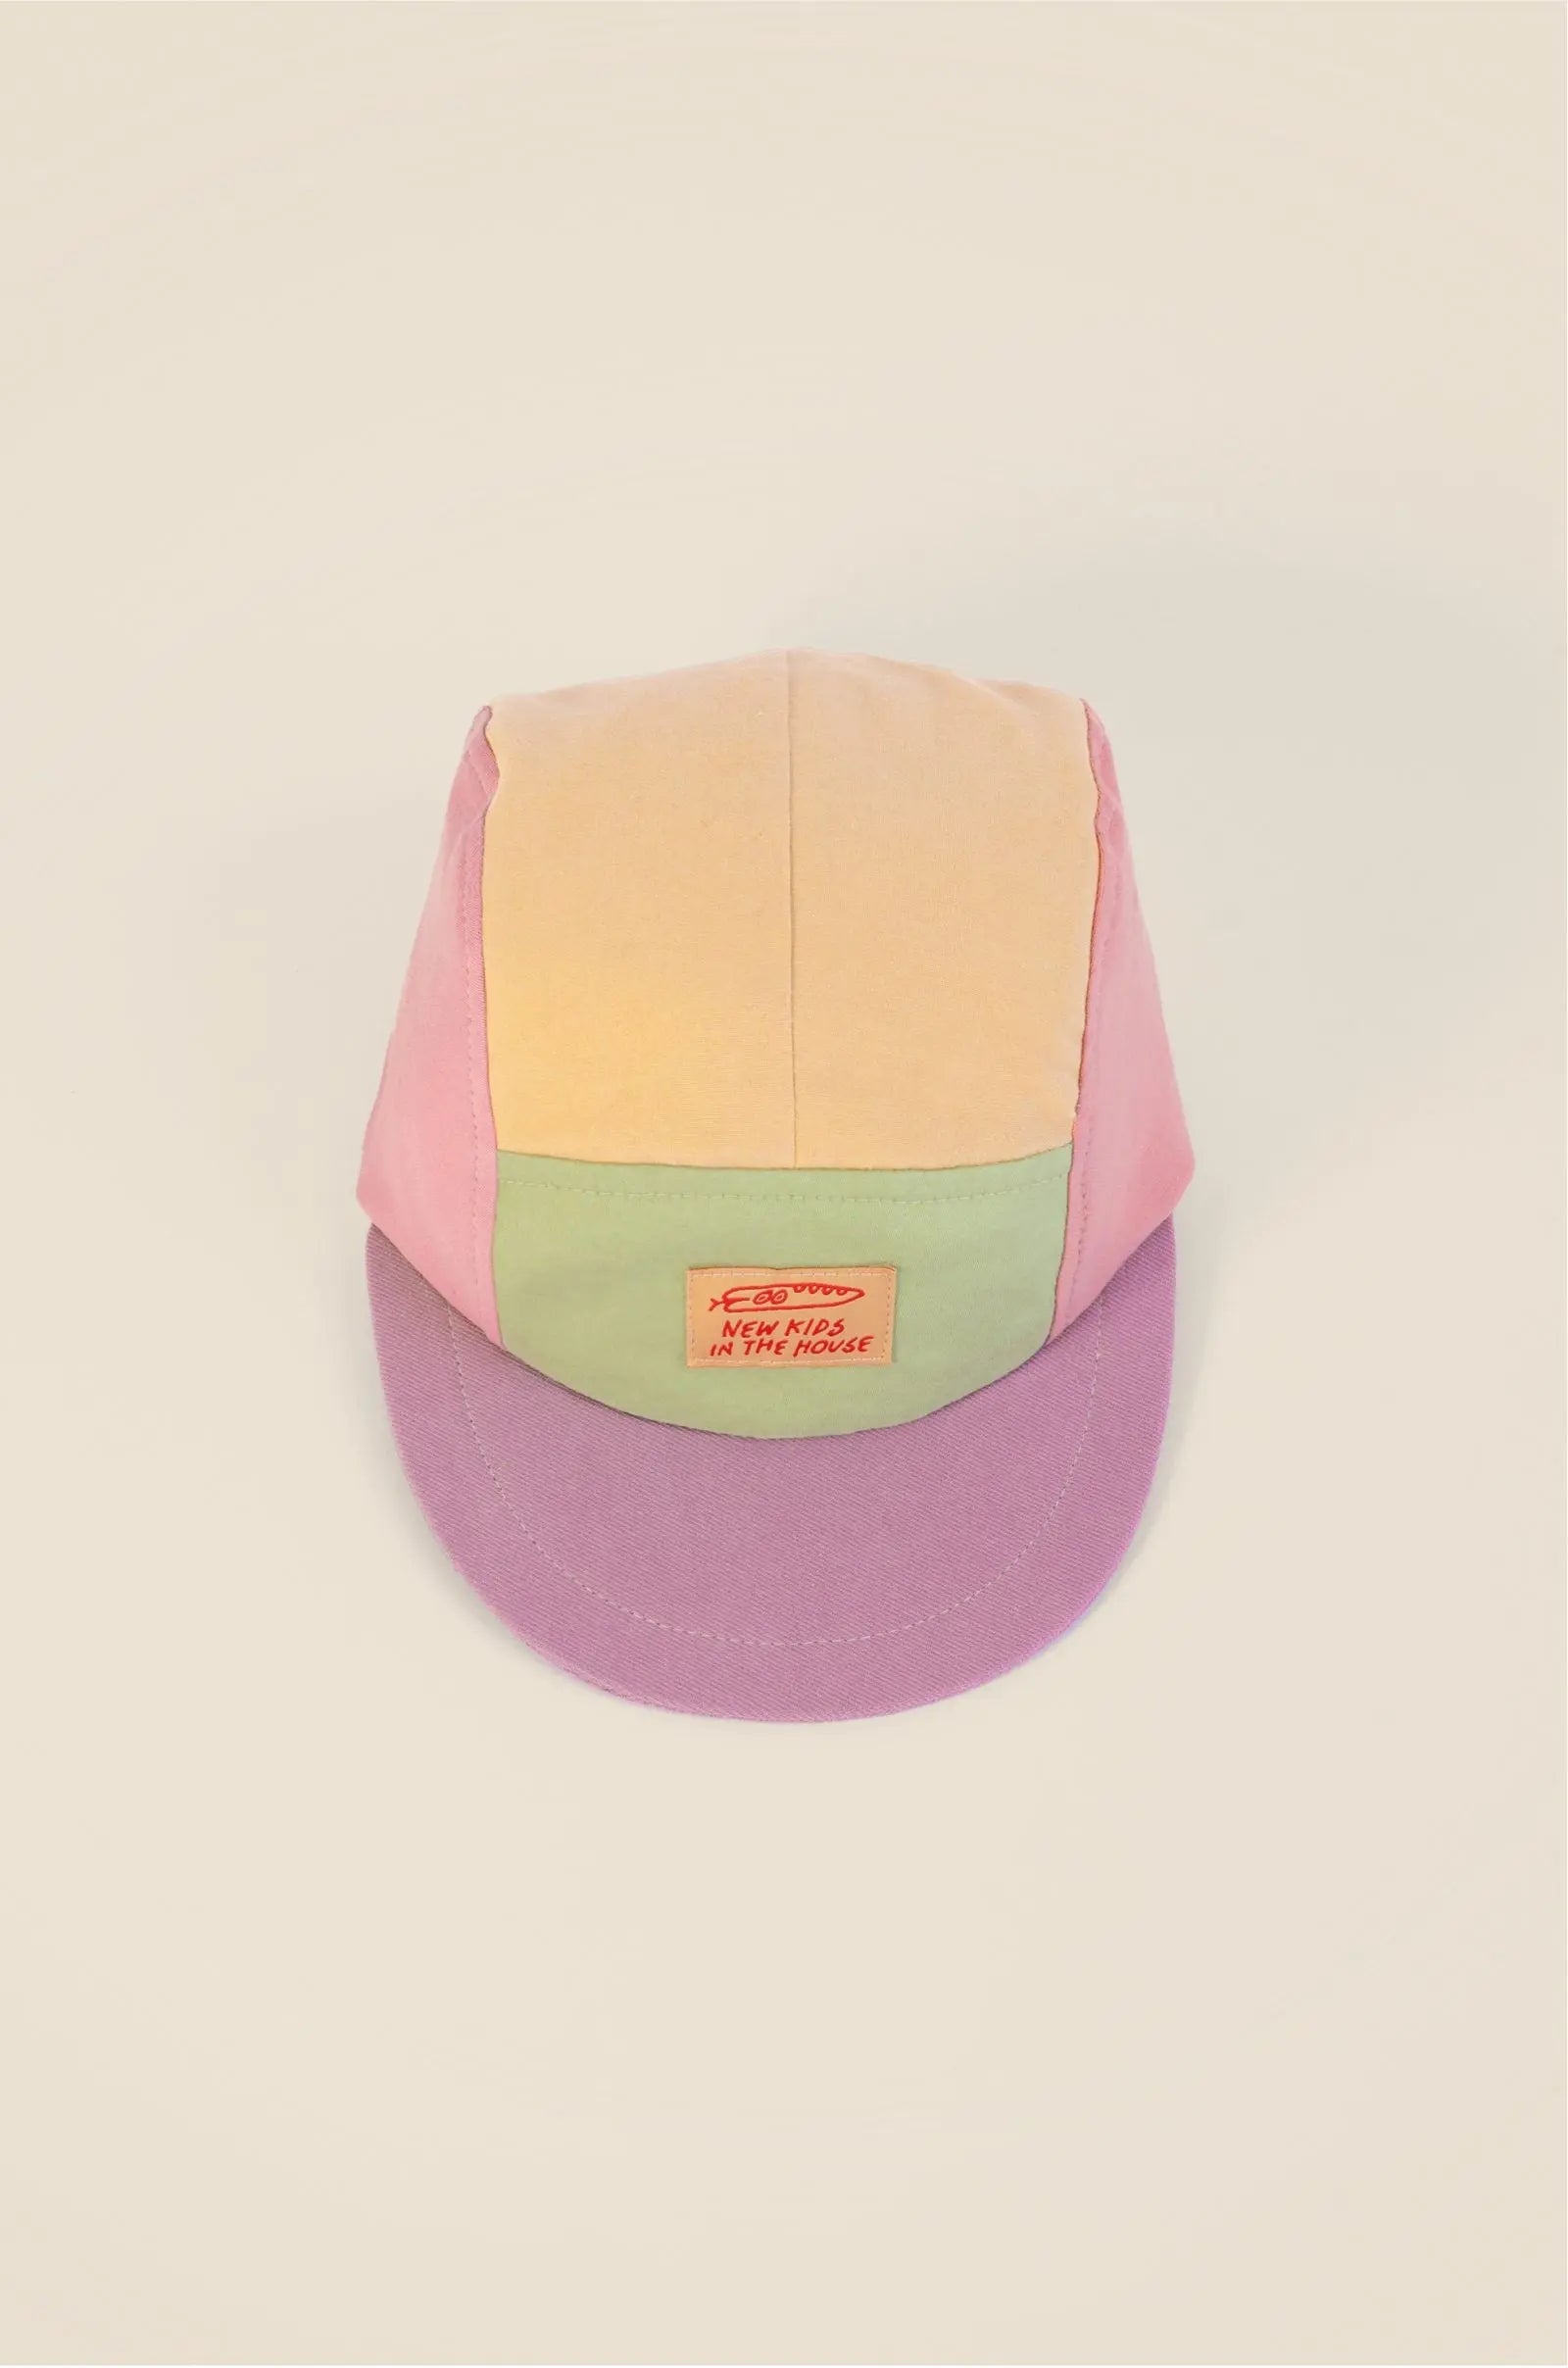 Upcycled 5-Panel Kids & Teens Summer Cap New Kids In The House